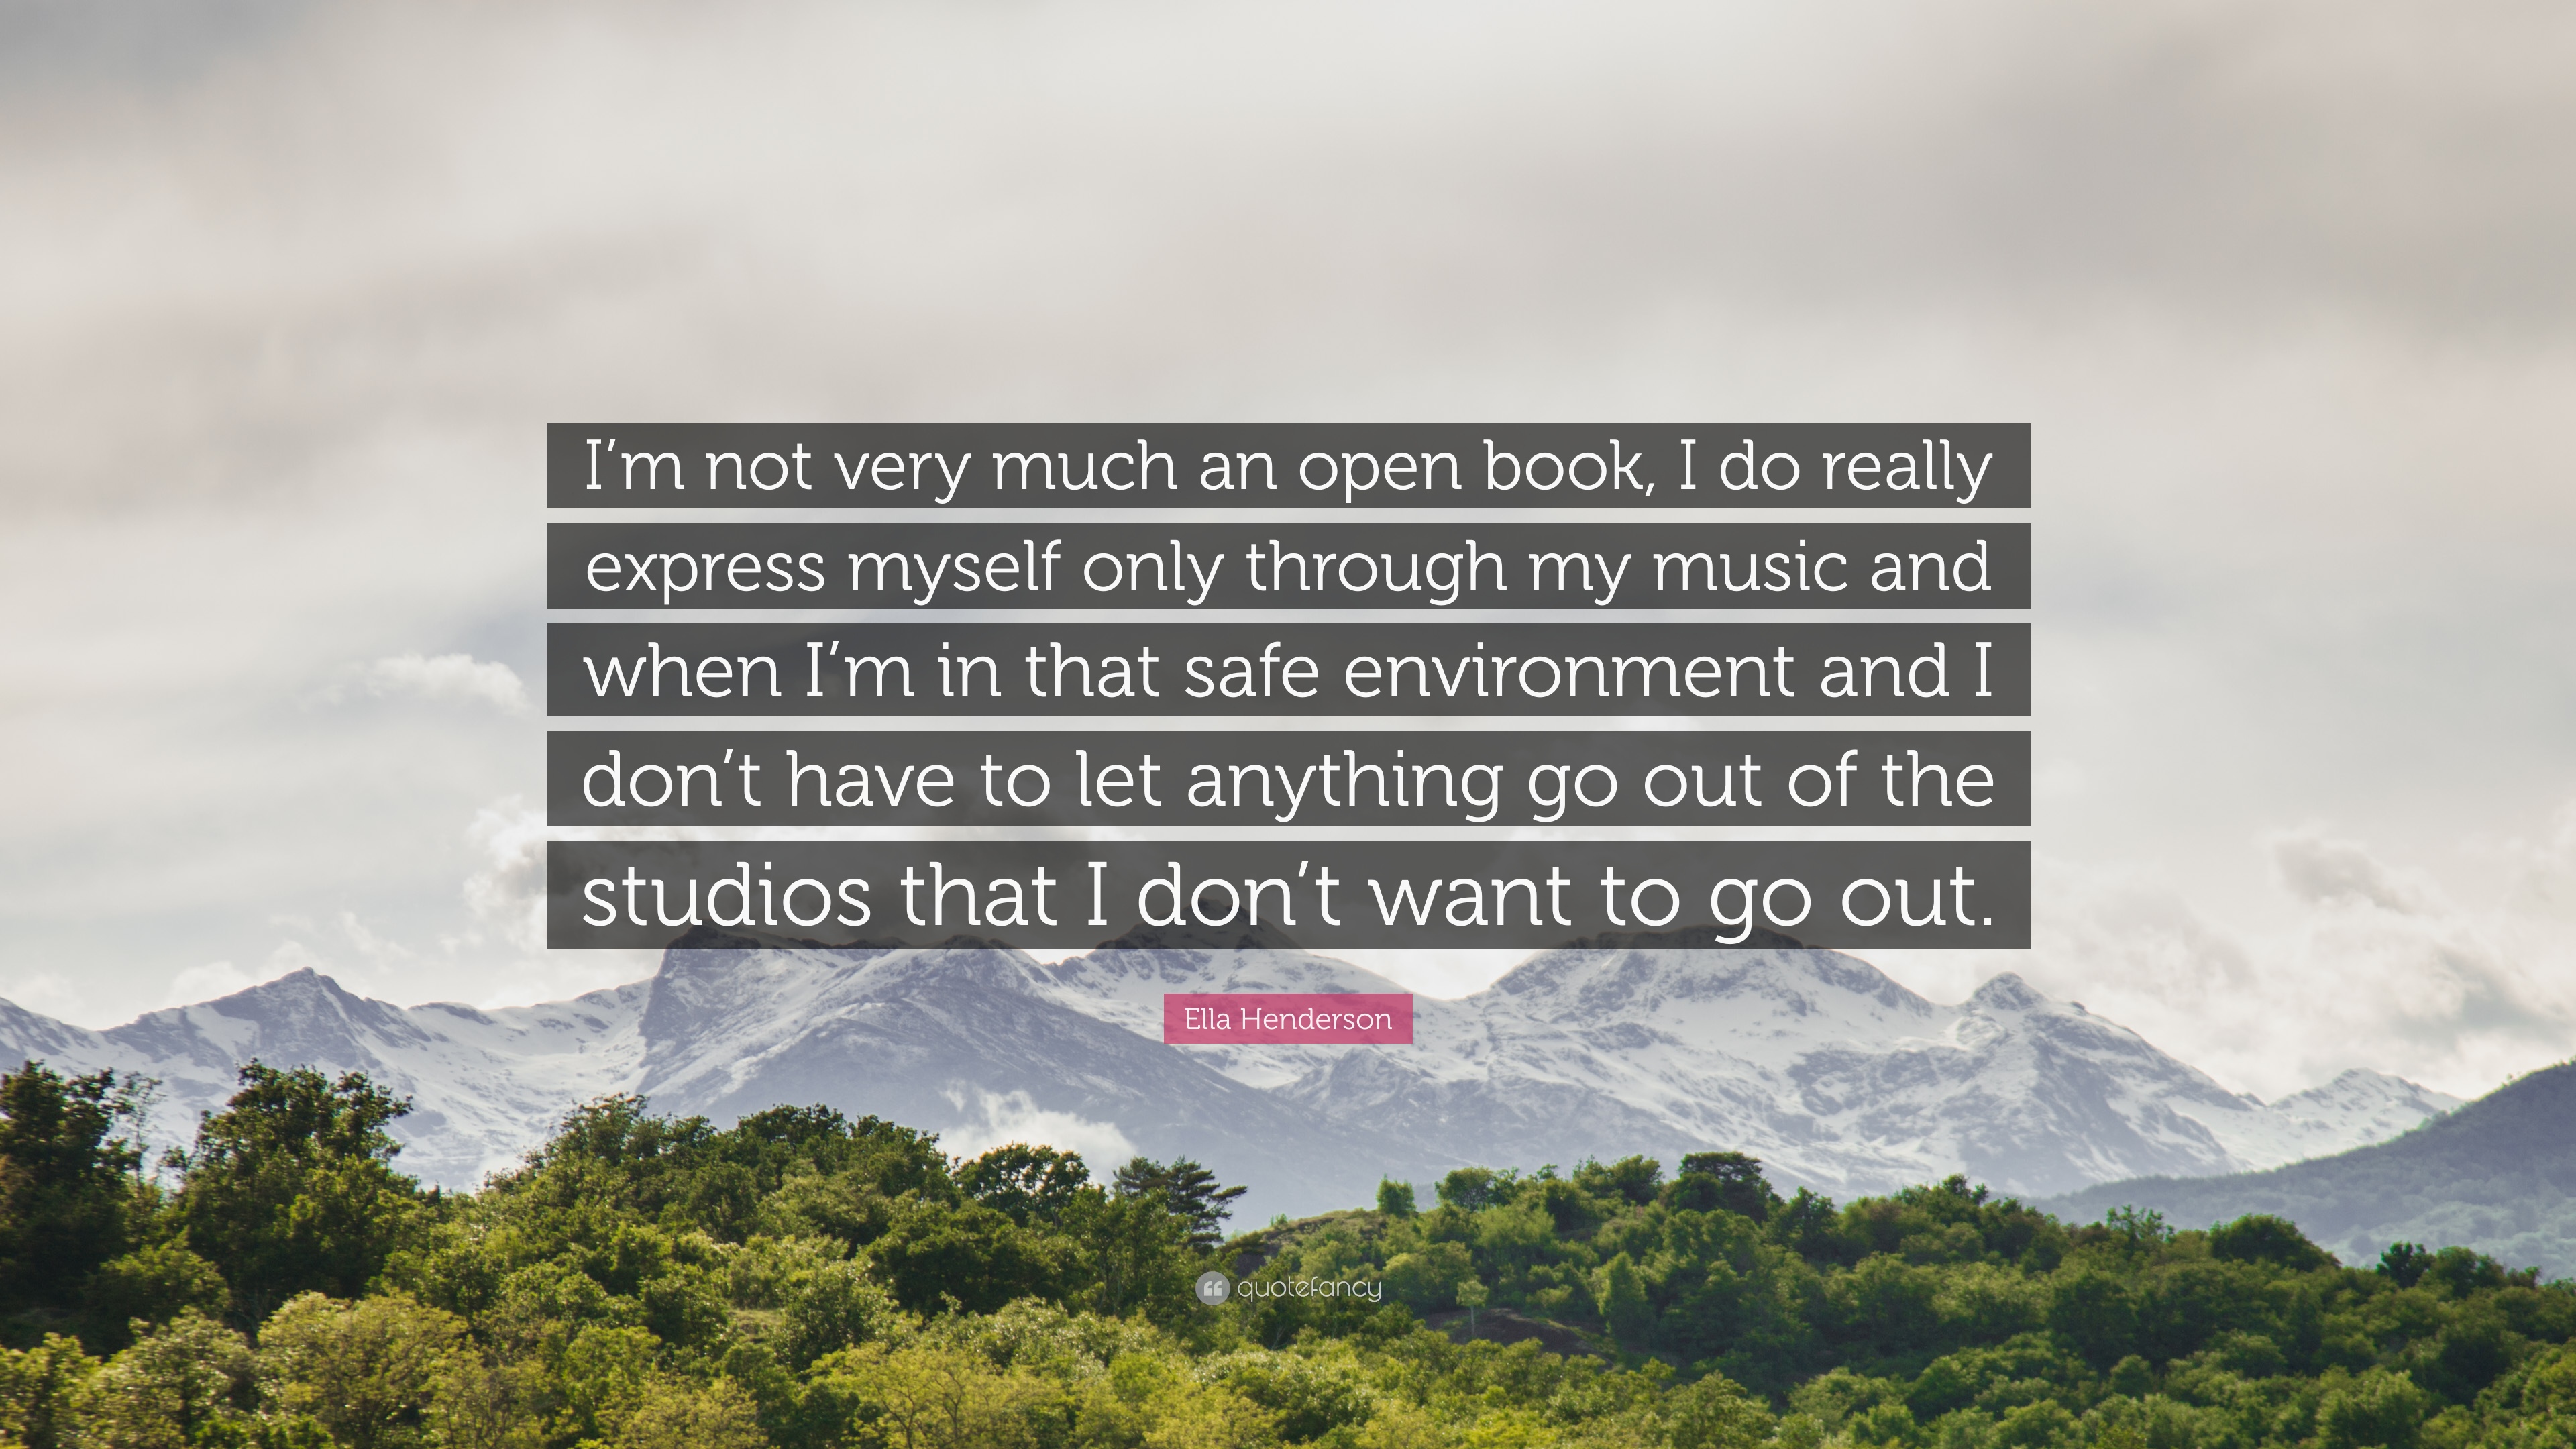 Ella Henderson Quote: “I'm not very much an open book, I do